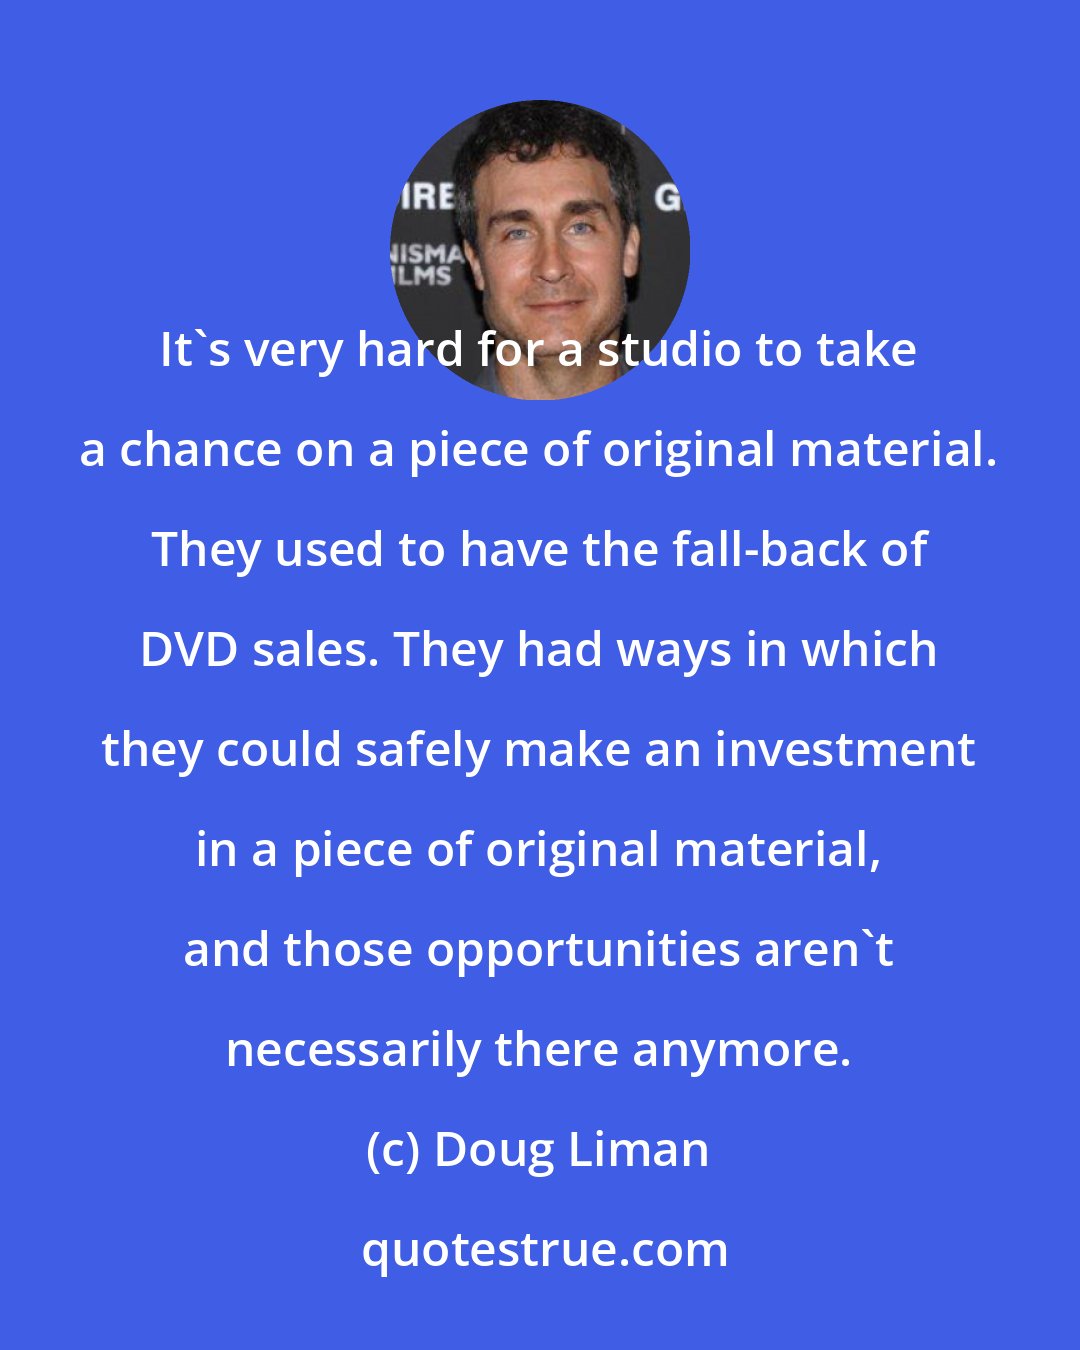 Doug Liman: It's very hard for a studio to take a chance on a piece of original material. They used to have the fall-back of DVD sales. They had ways in which they could safely make an investment in a piece of original material, and those opportunities aren't necessarily there anymore.